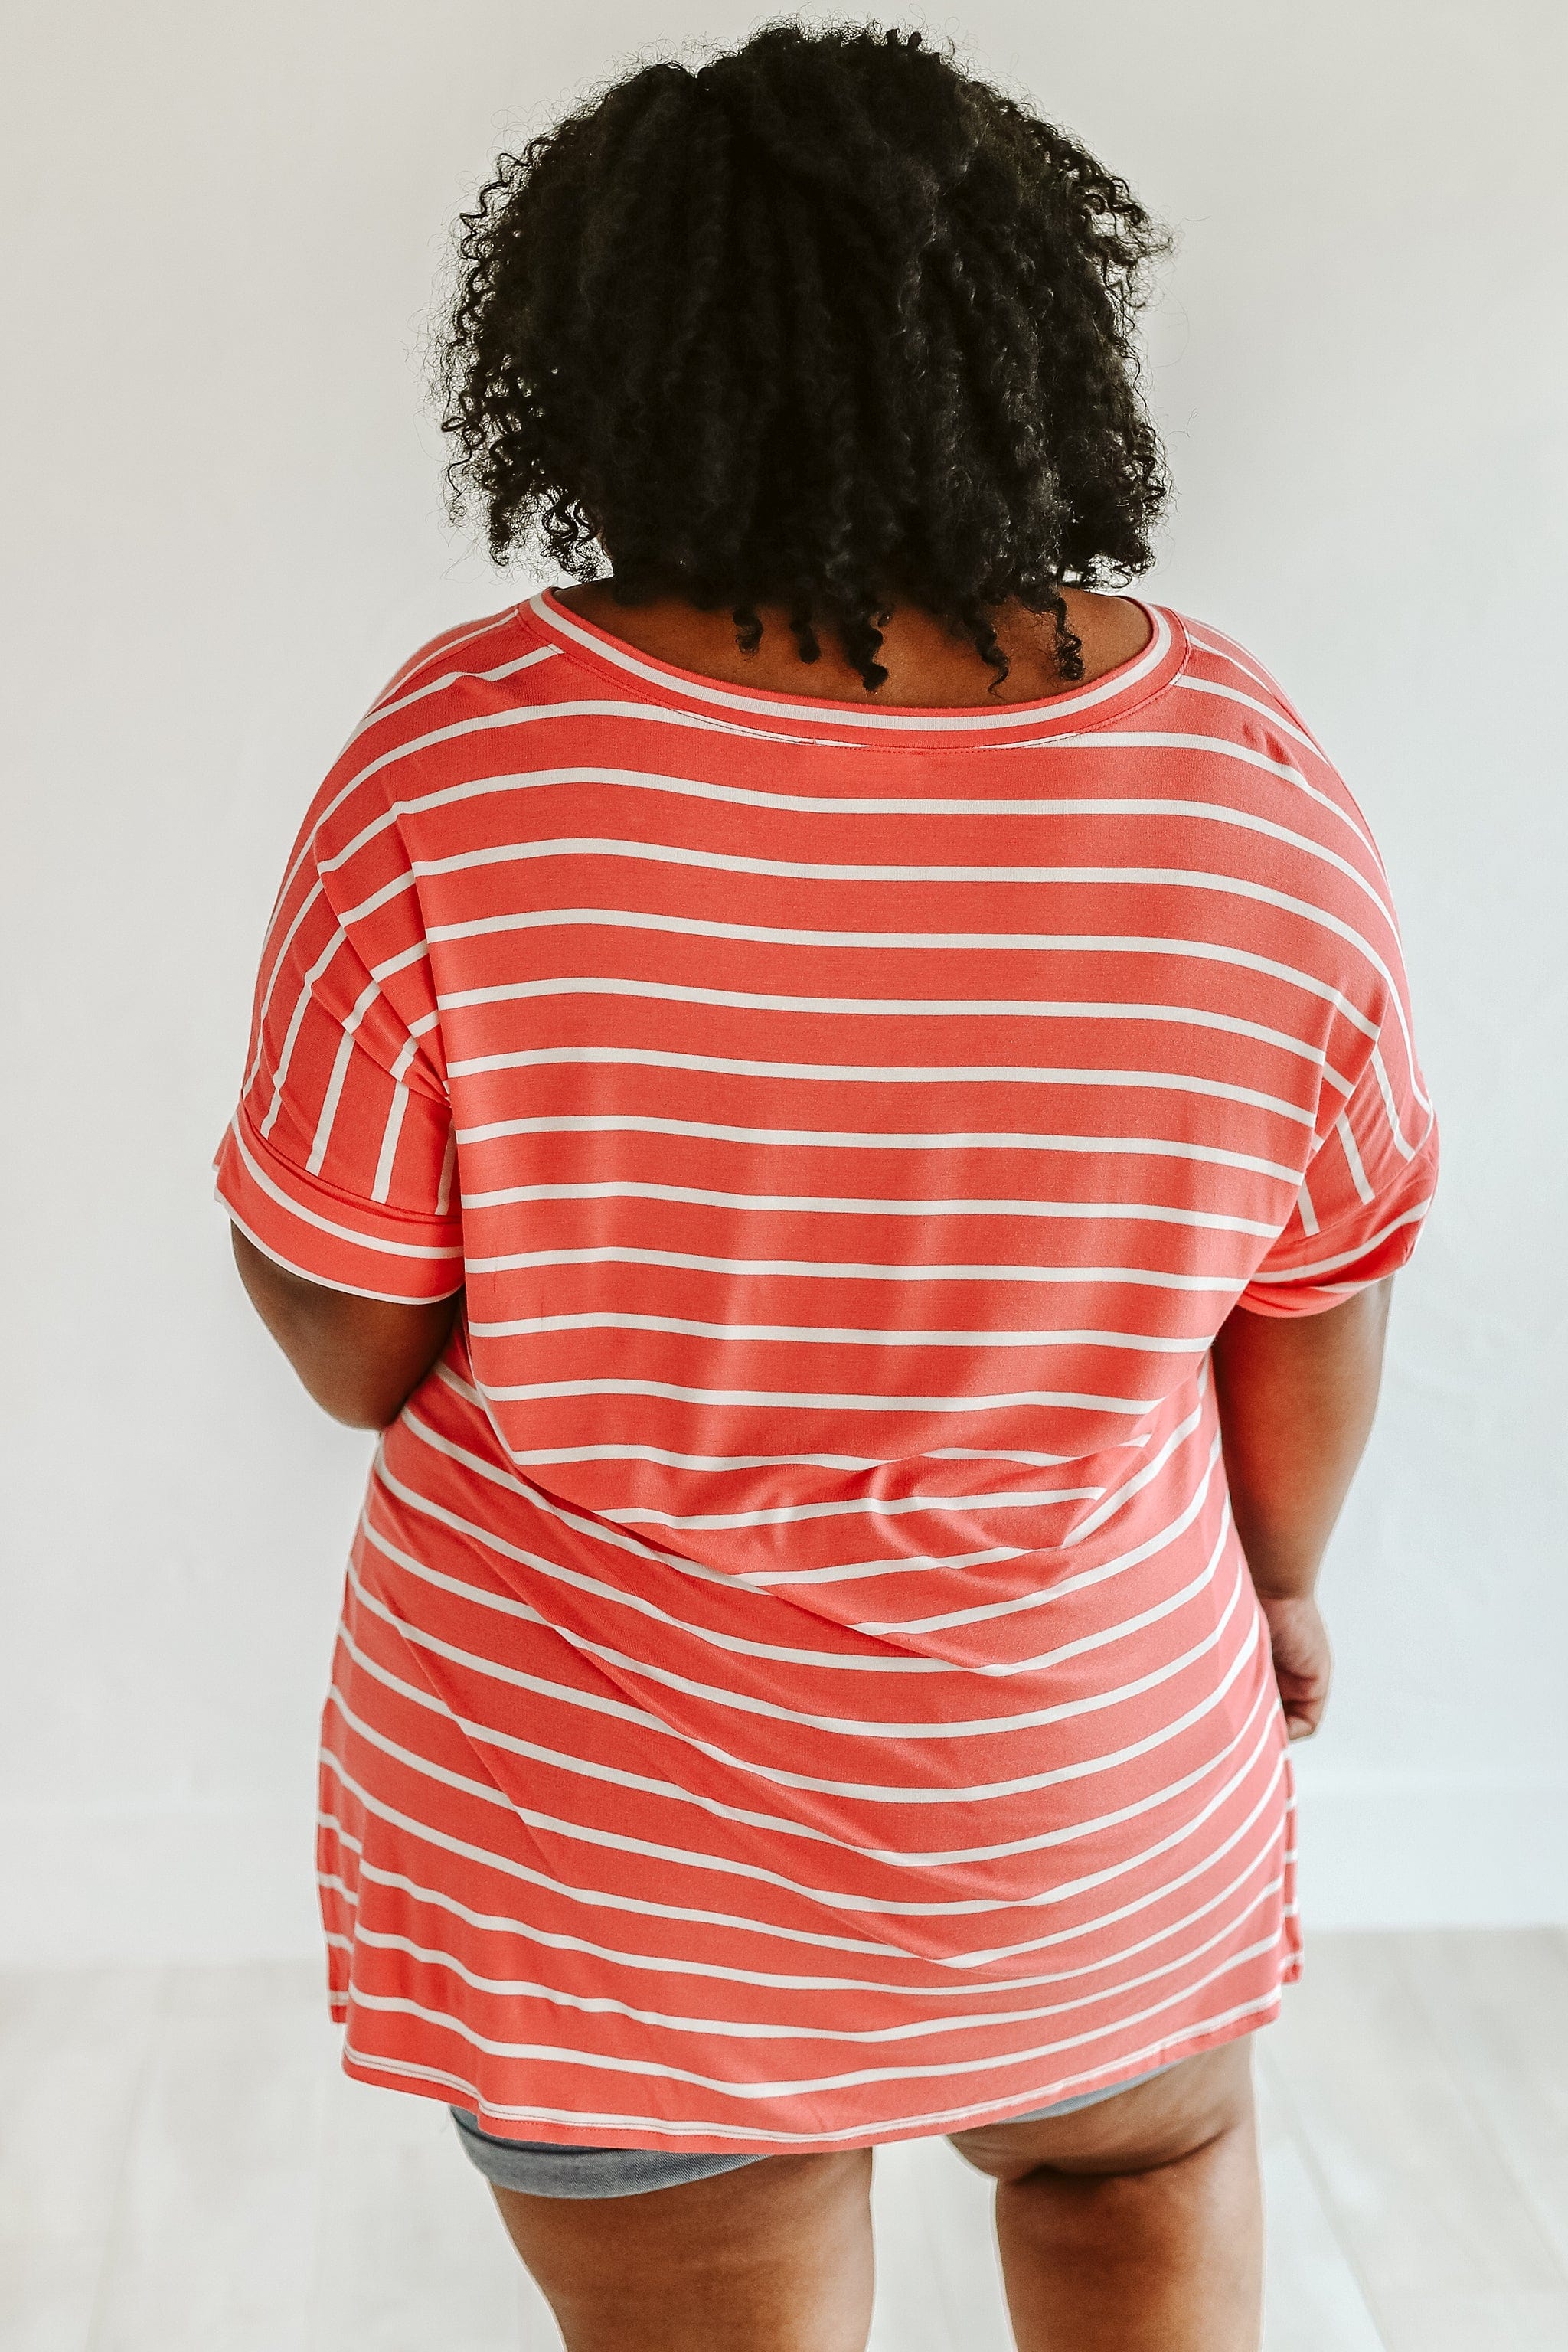 Good Times Roll Deep Coral/Ivory Striped Top